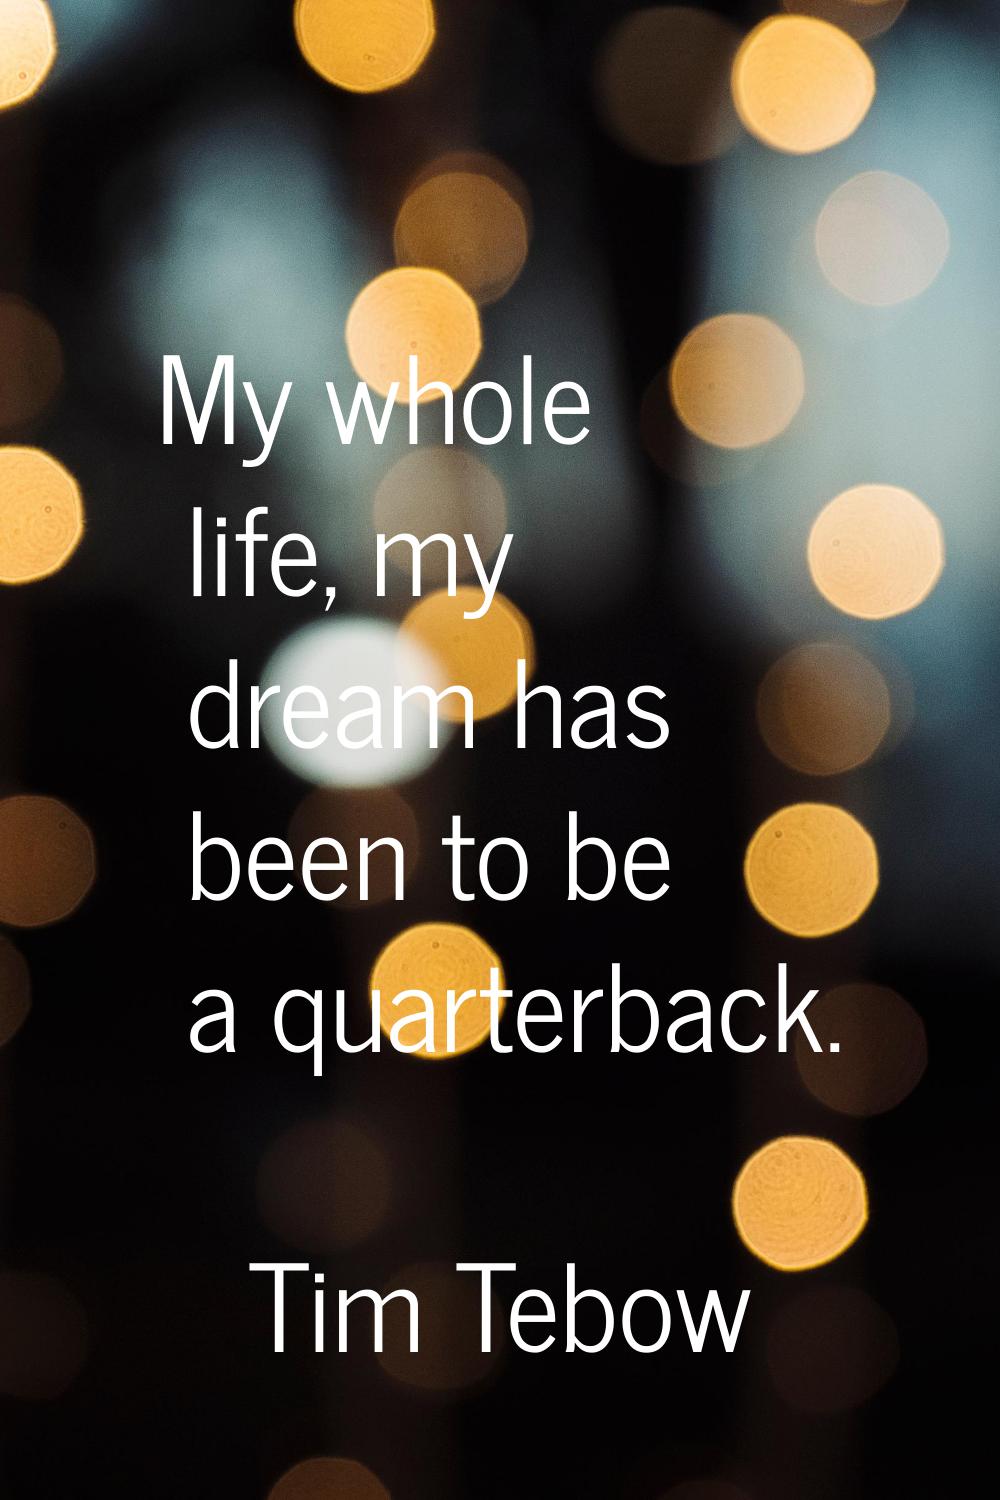 My whole life, my dream has been to be a quarterback.